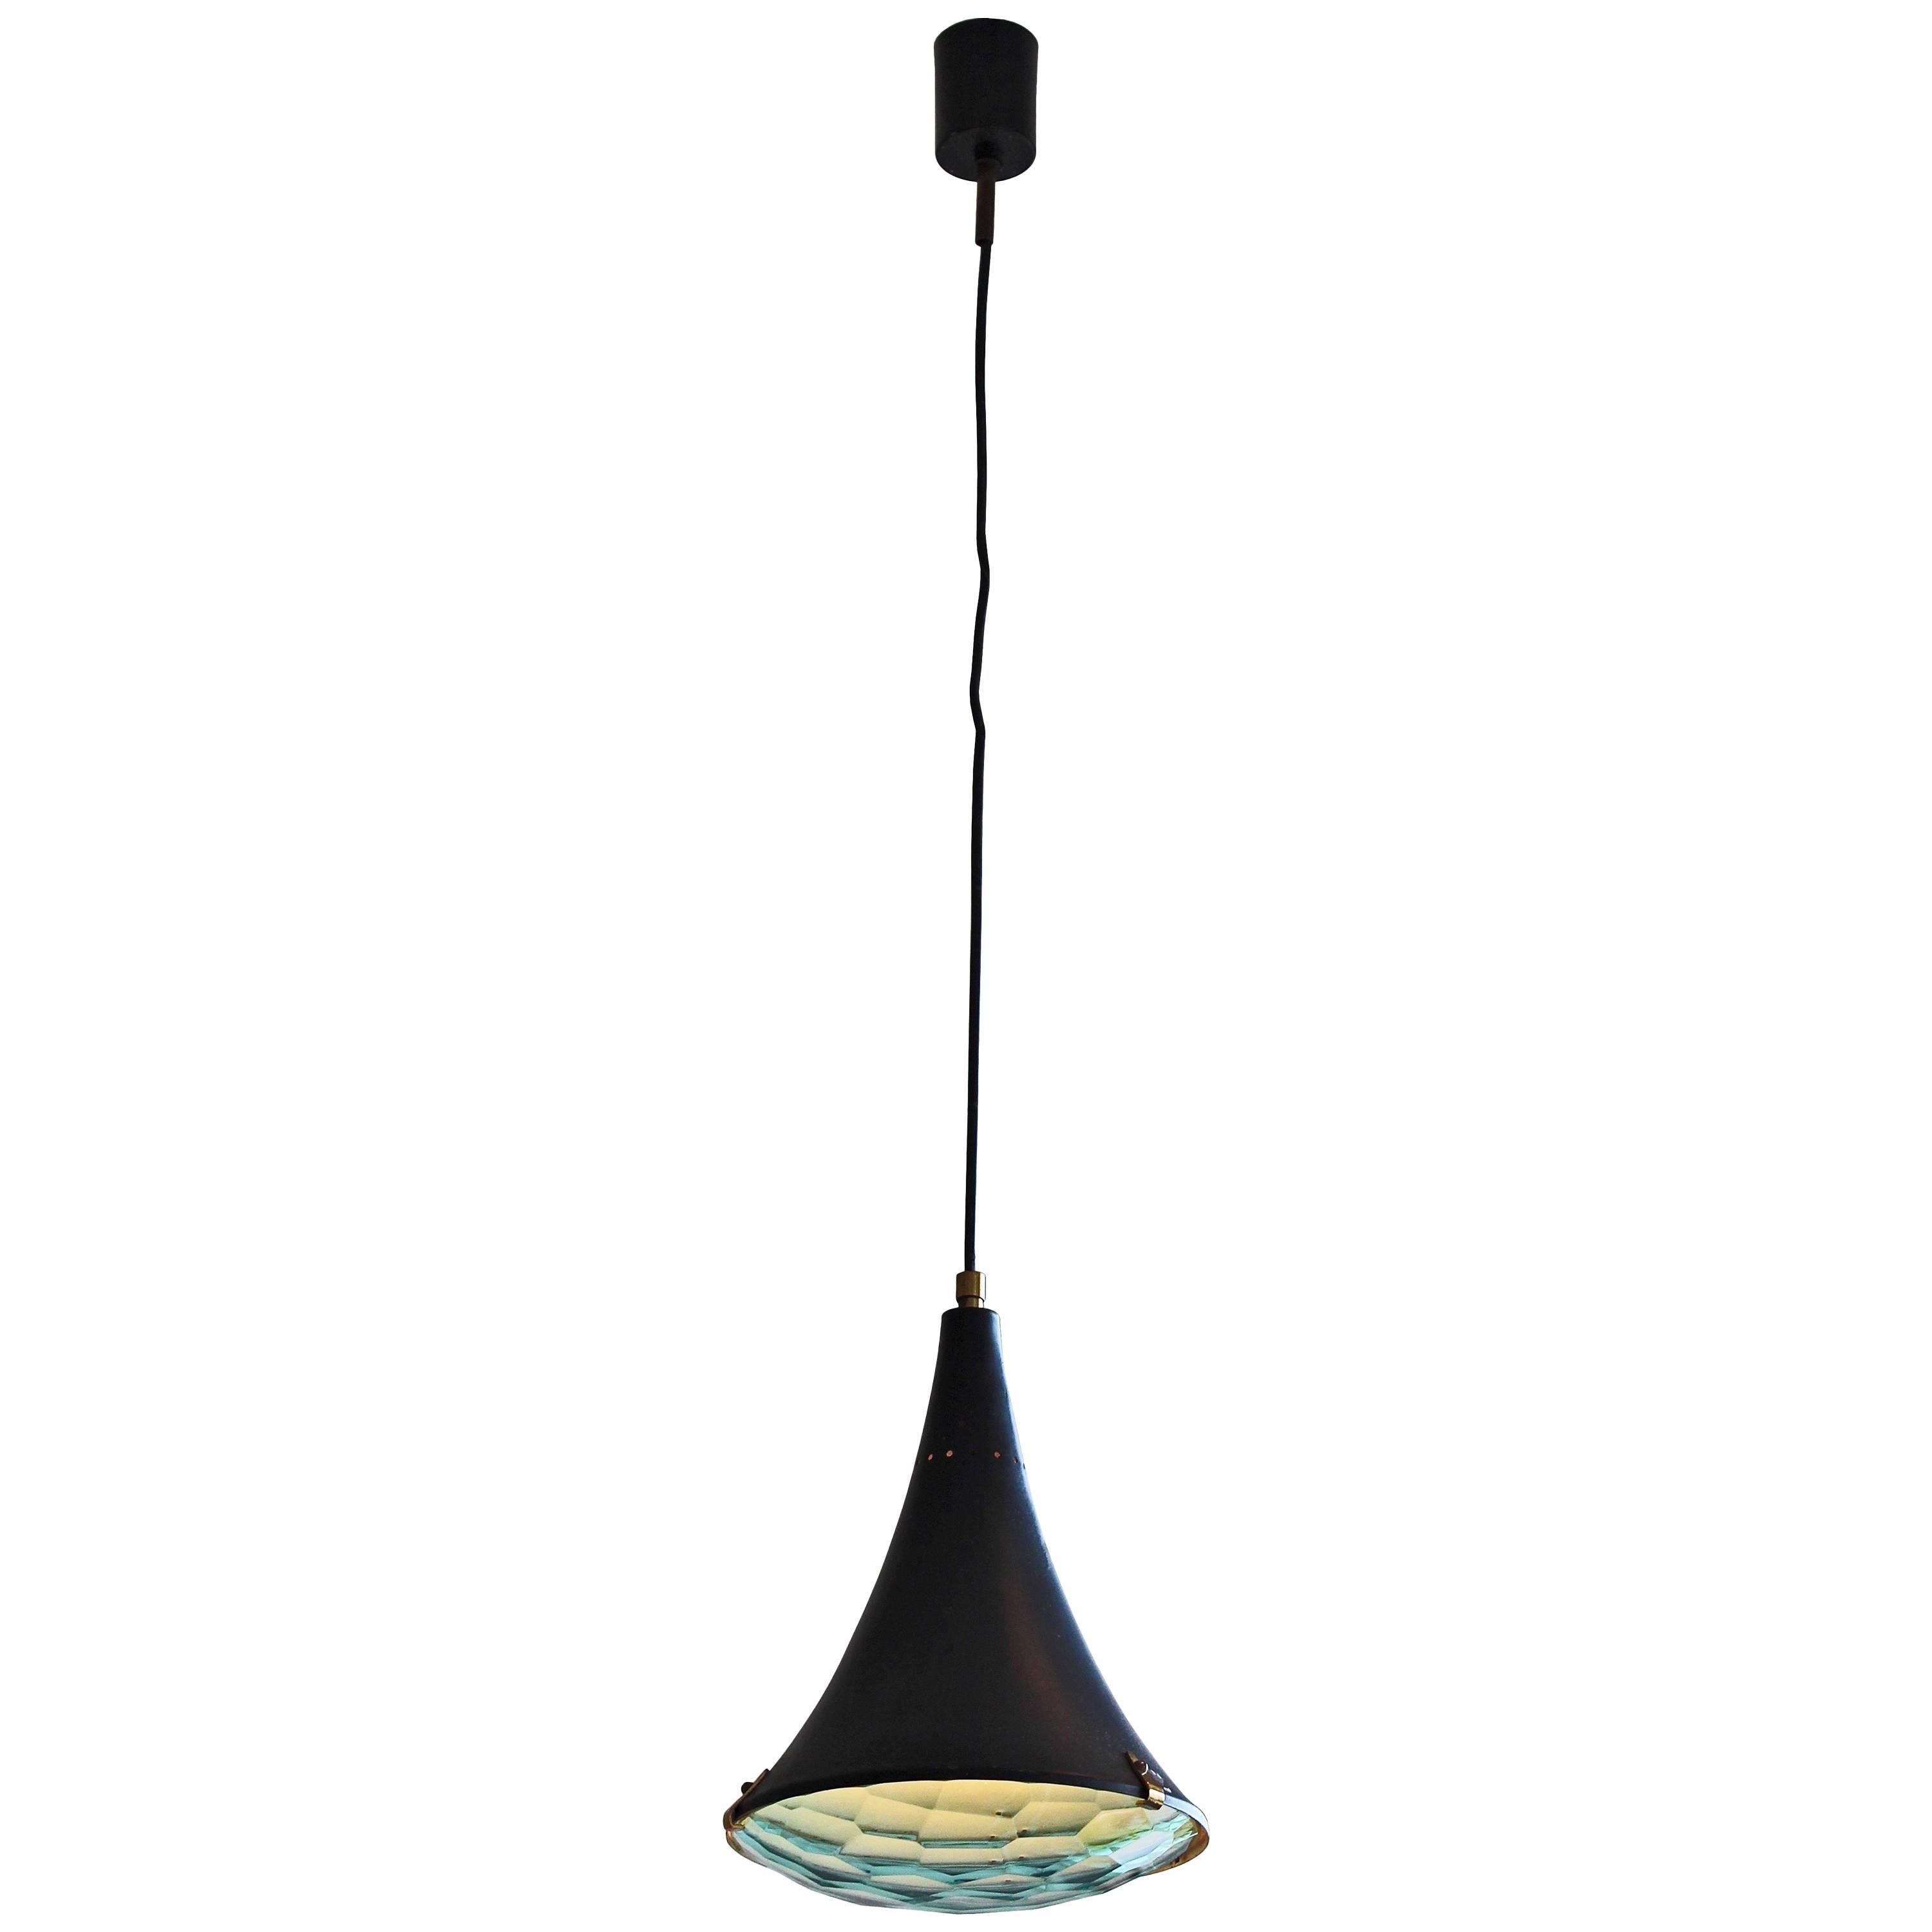 Rare stilnovo pendant with faceted glass, black lacquer shade with brass details

Similar in design to Max Ingrand for Fontana Arte pendant.

Drop from ceiling to suit.